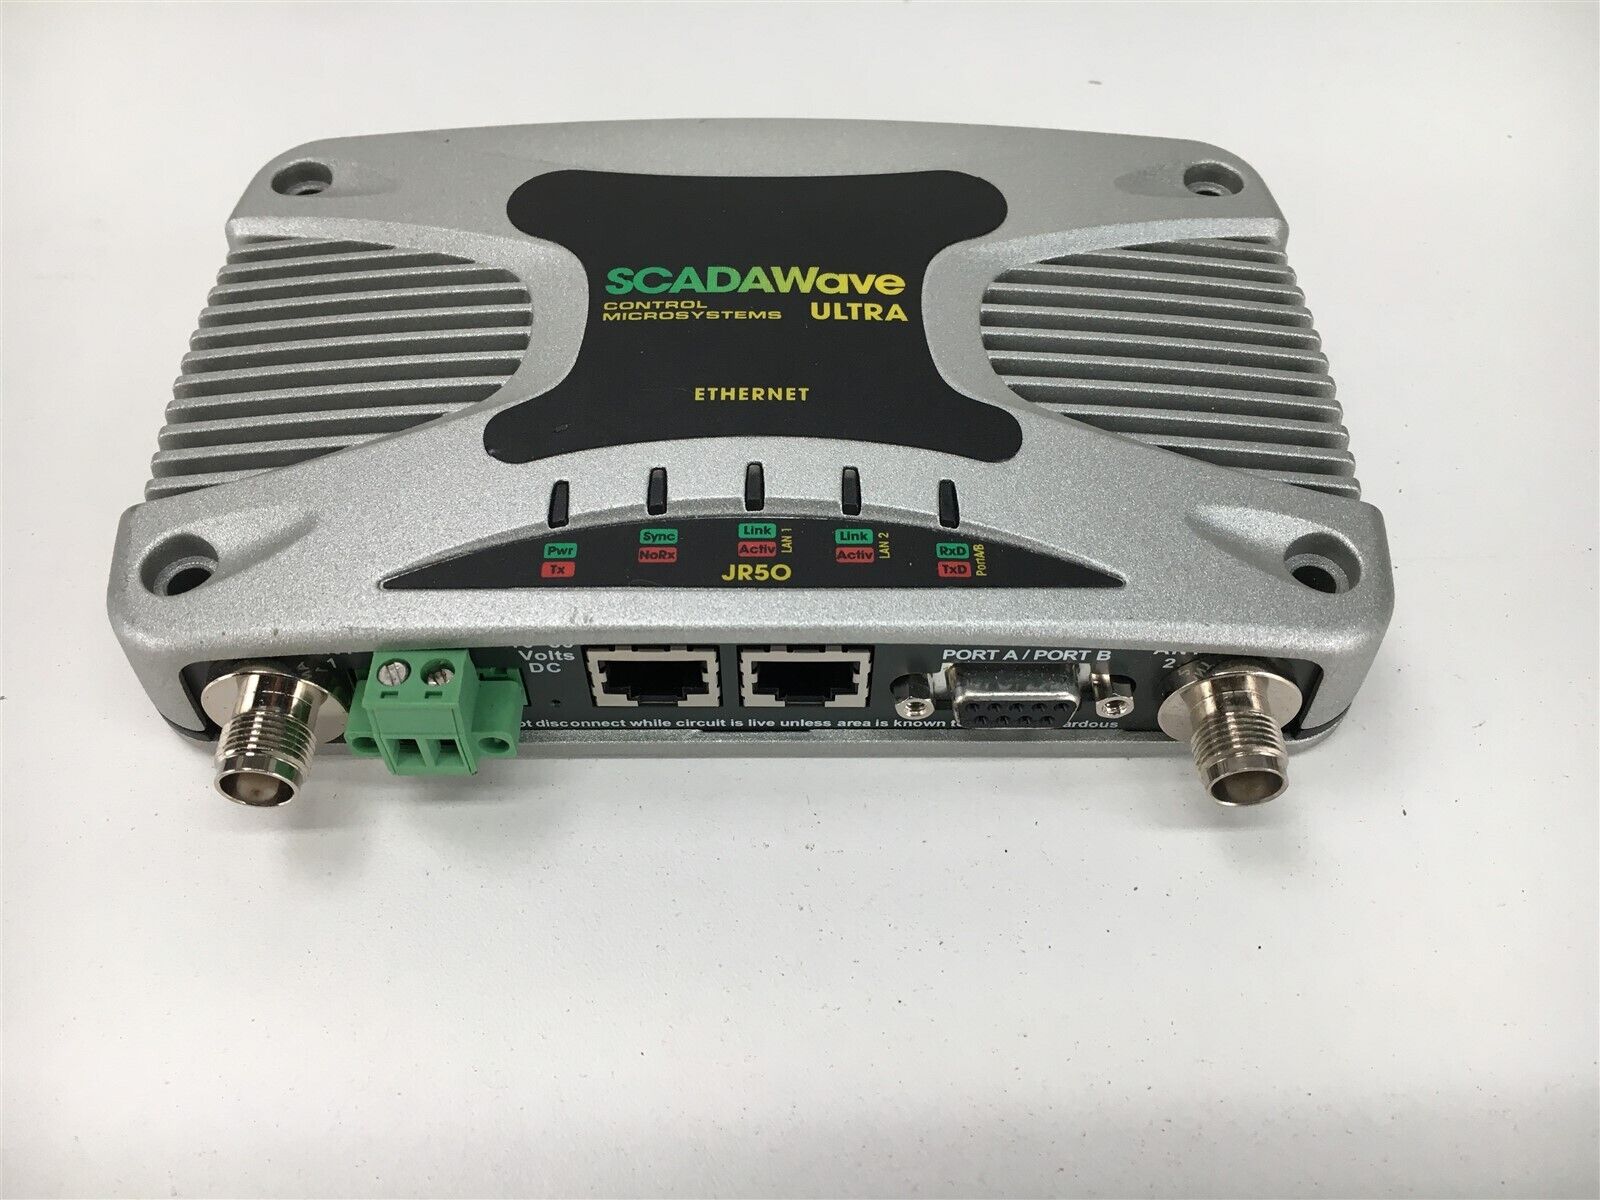 Control Microsystems SCADAWave JR900 Ethernet Ultra Remote